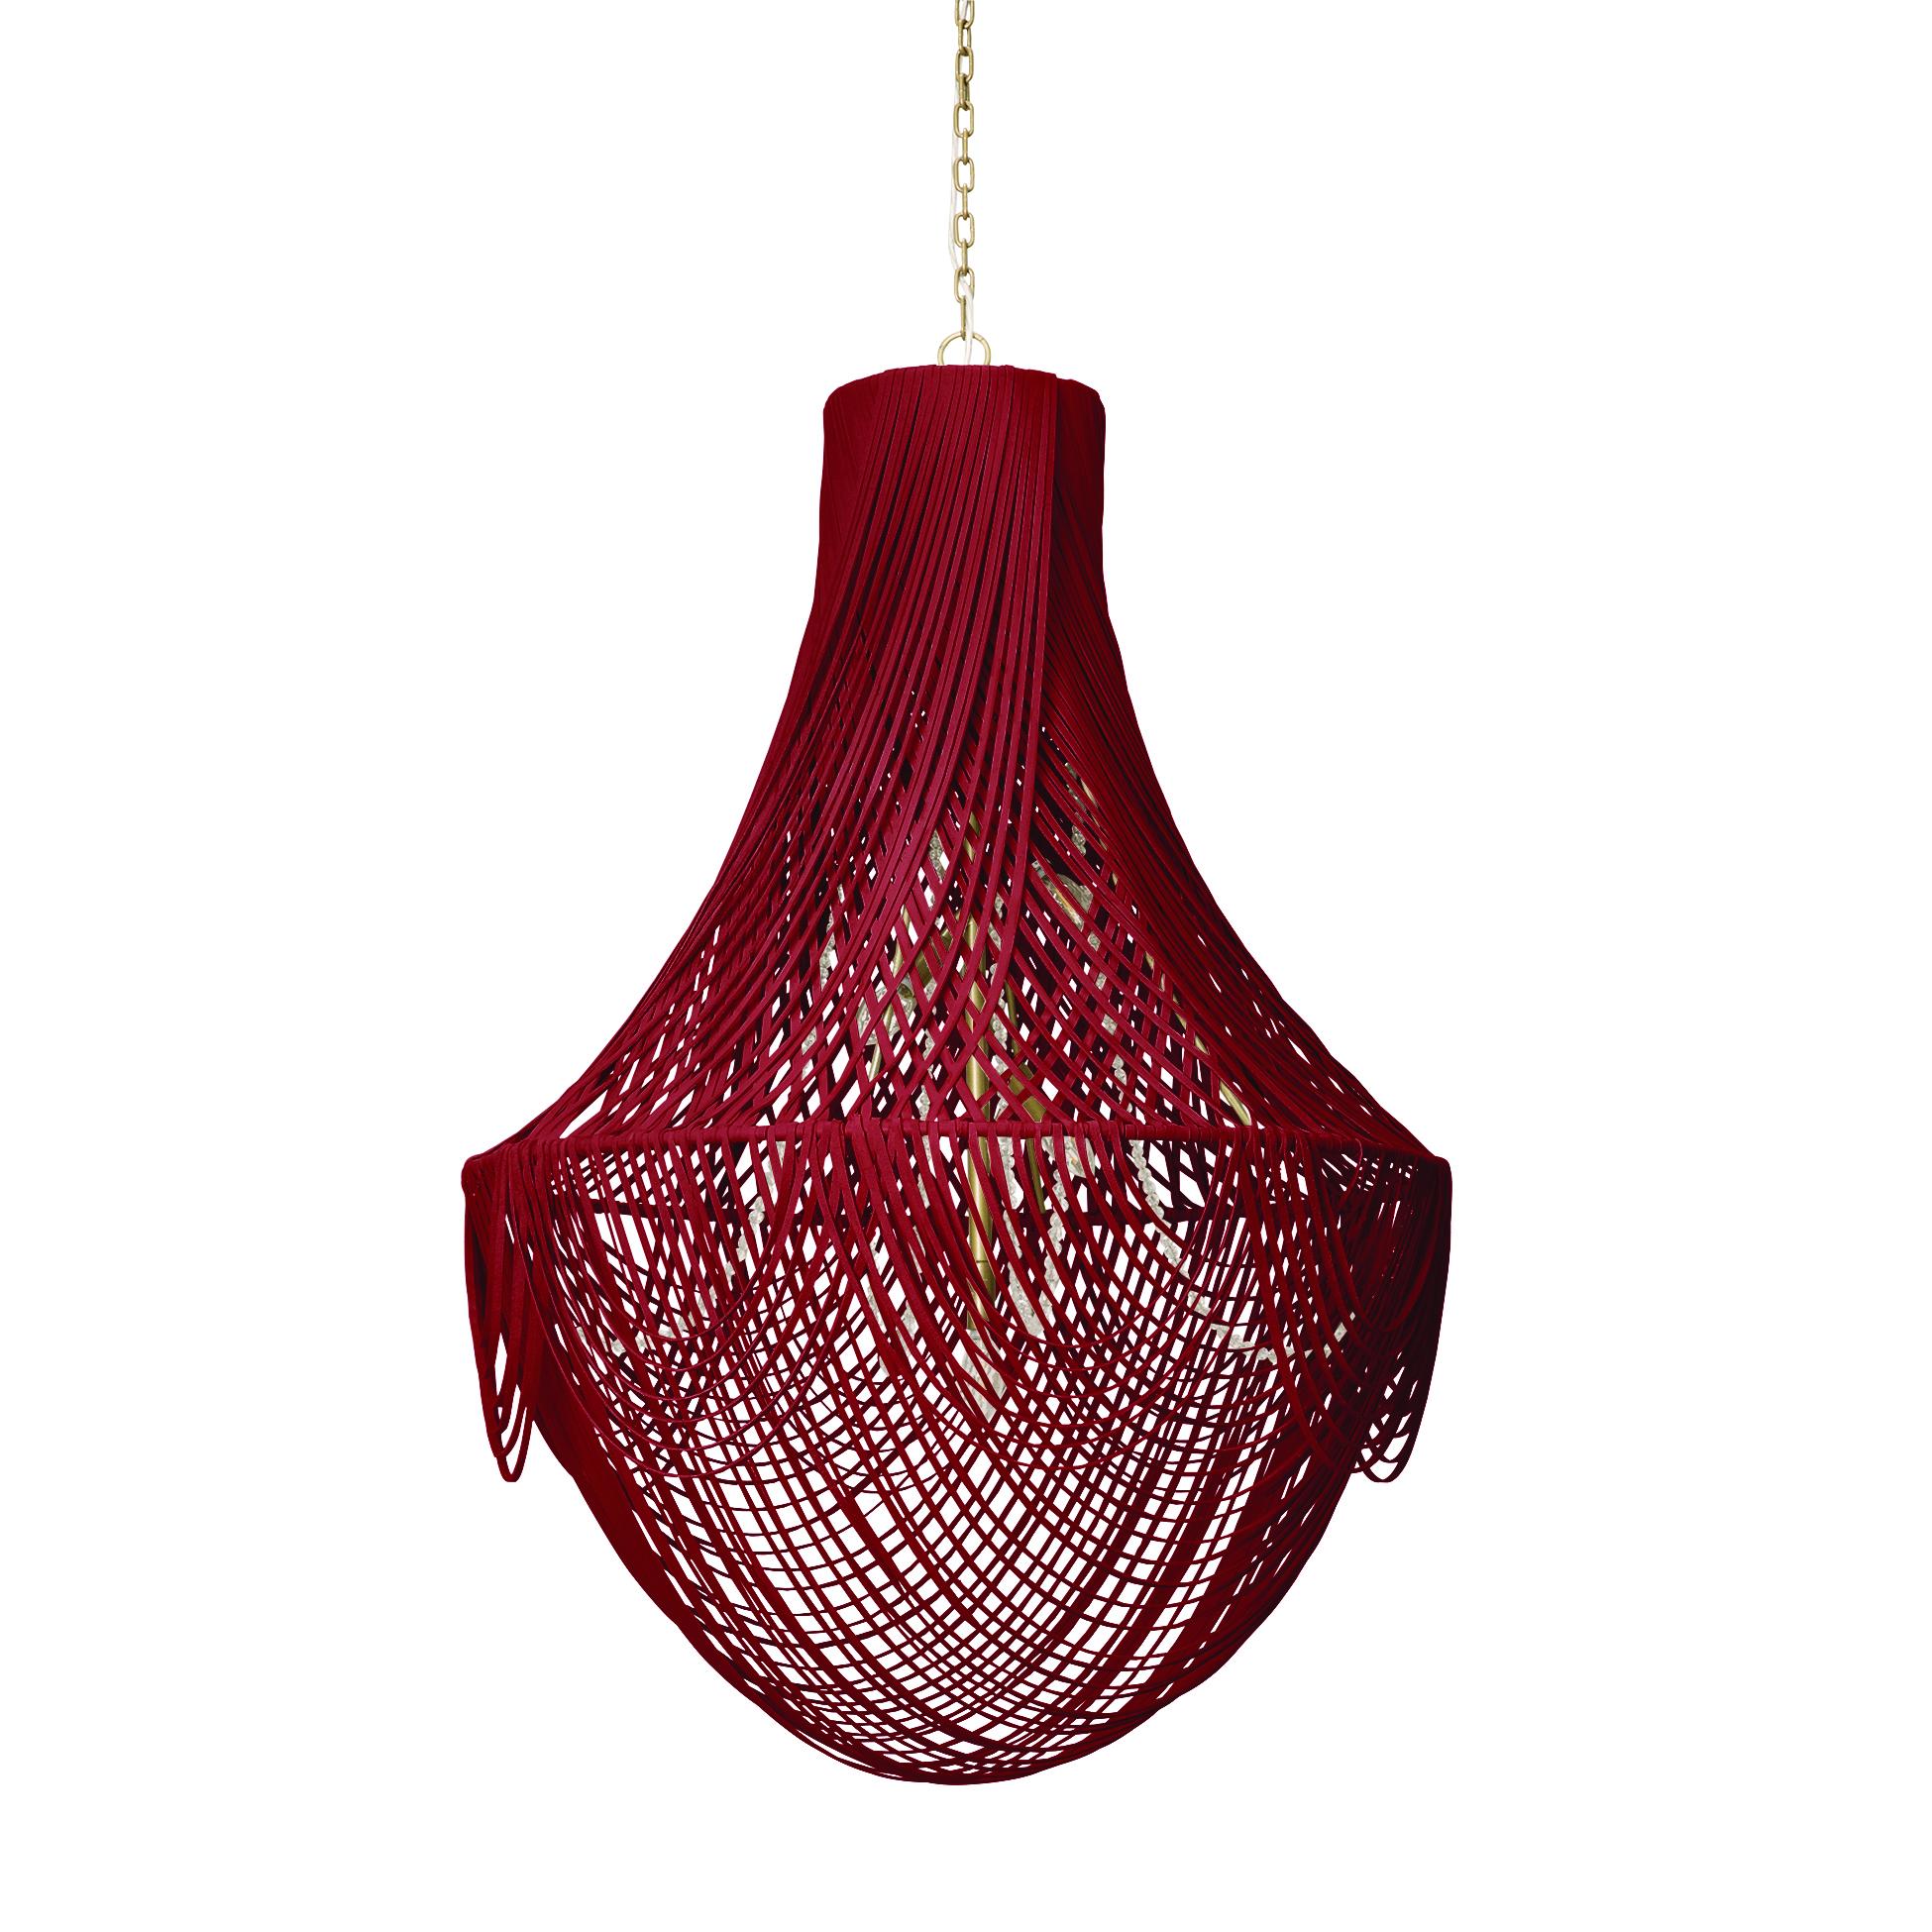 Empire Chandelier - Large - NeKeia Leather